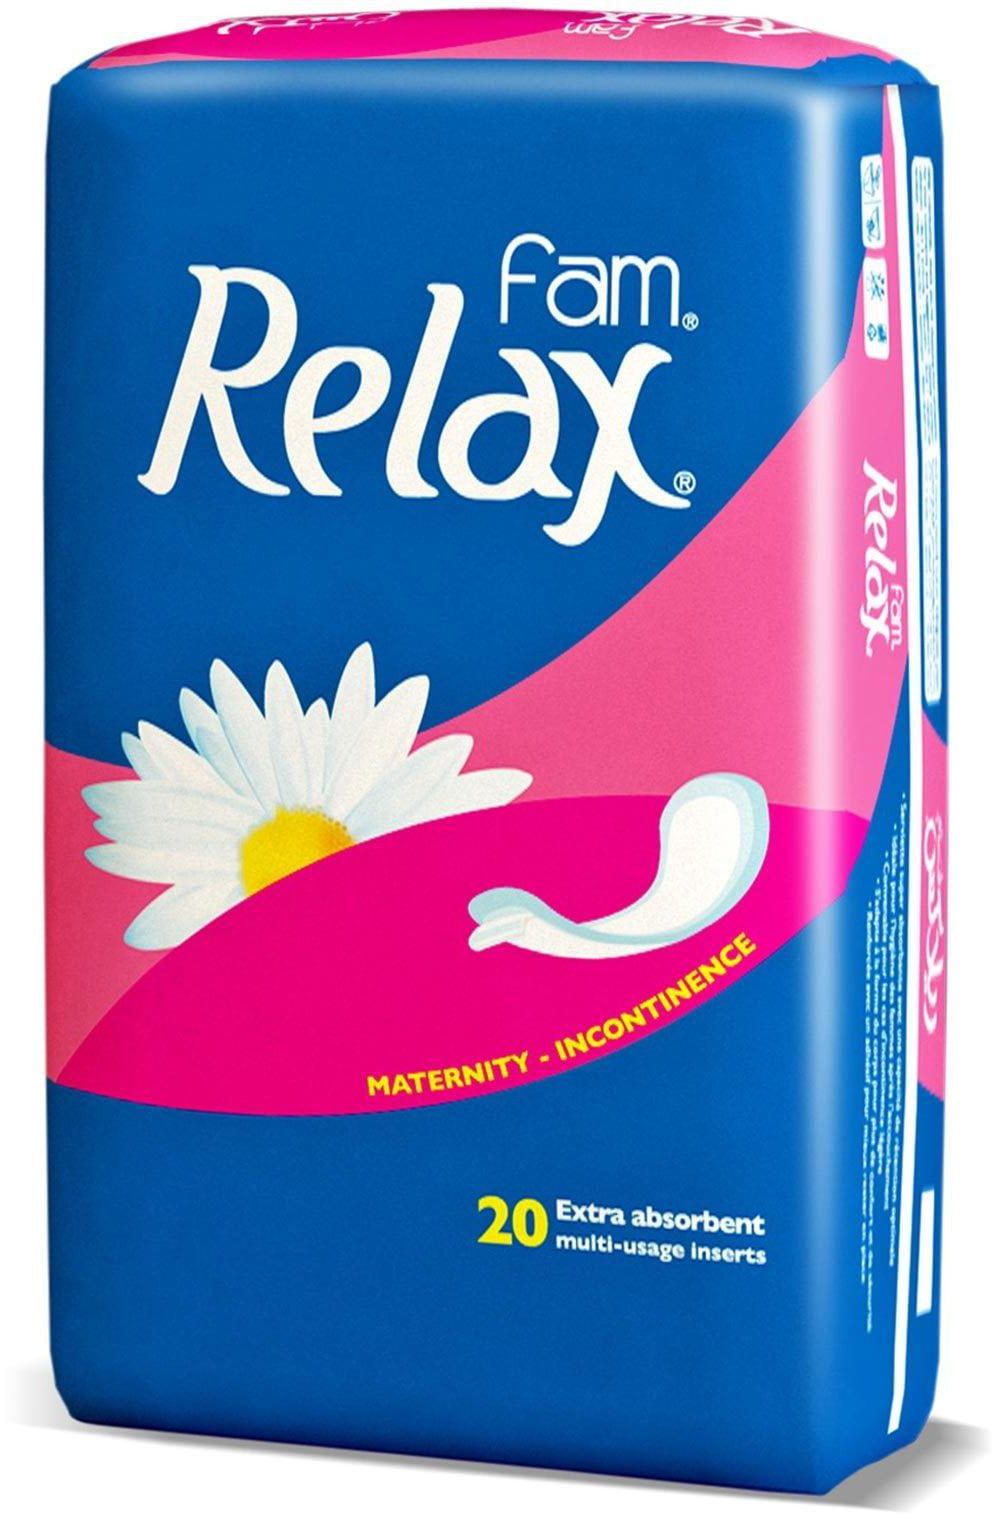 Fam relax 20 pads